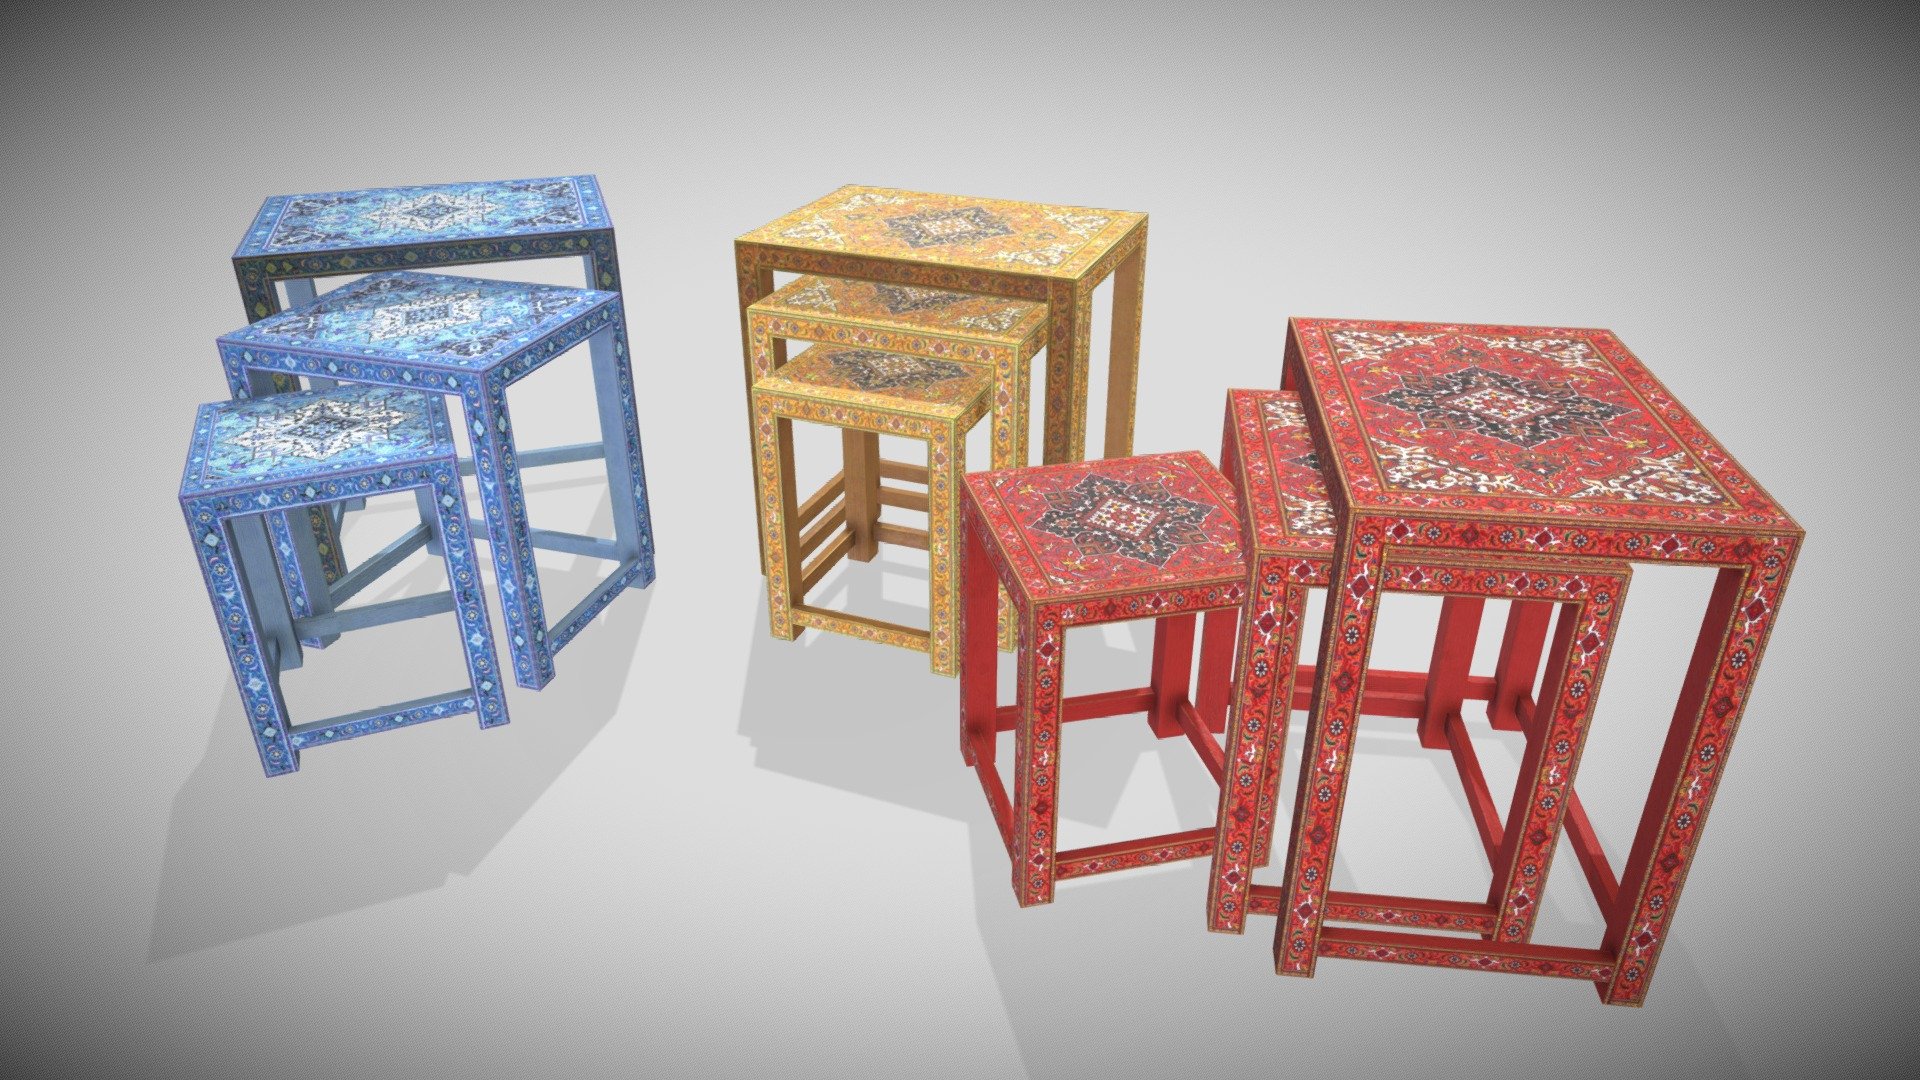 One Material PBR Metalness 4k

Same Color Map in 3 different Colors

All Quads - Indian Small Footstool - Awallw - Buy Royalty Free 3D model by Francesco Coldesina (@topfrank2013) 3d model